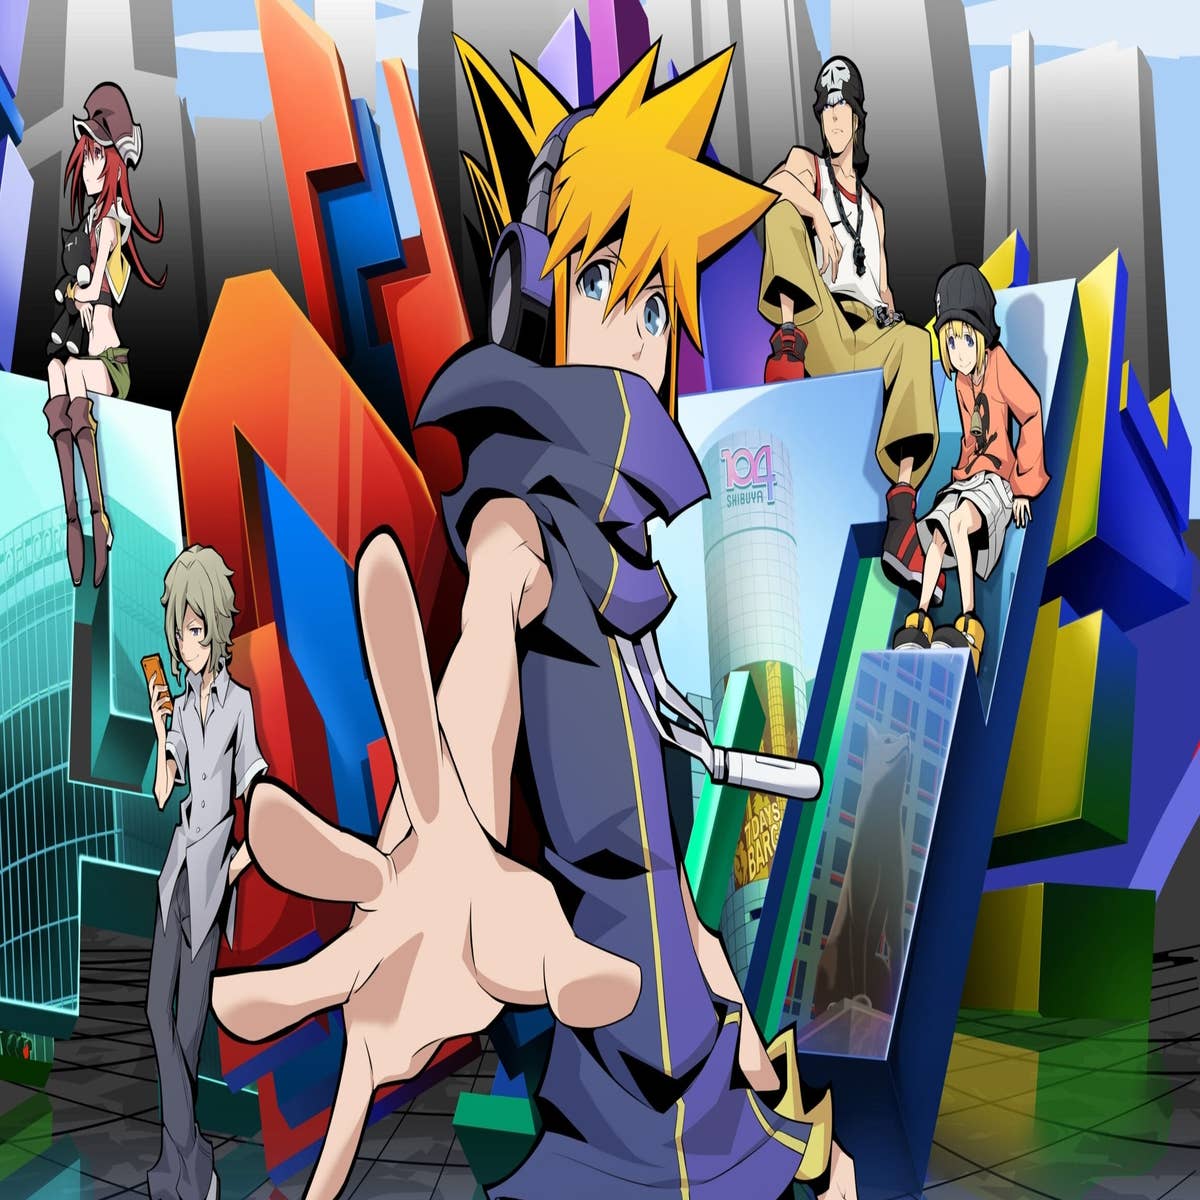 The World Ends With You' Anime Has A New Trailer